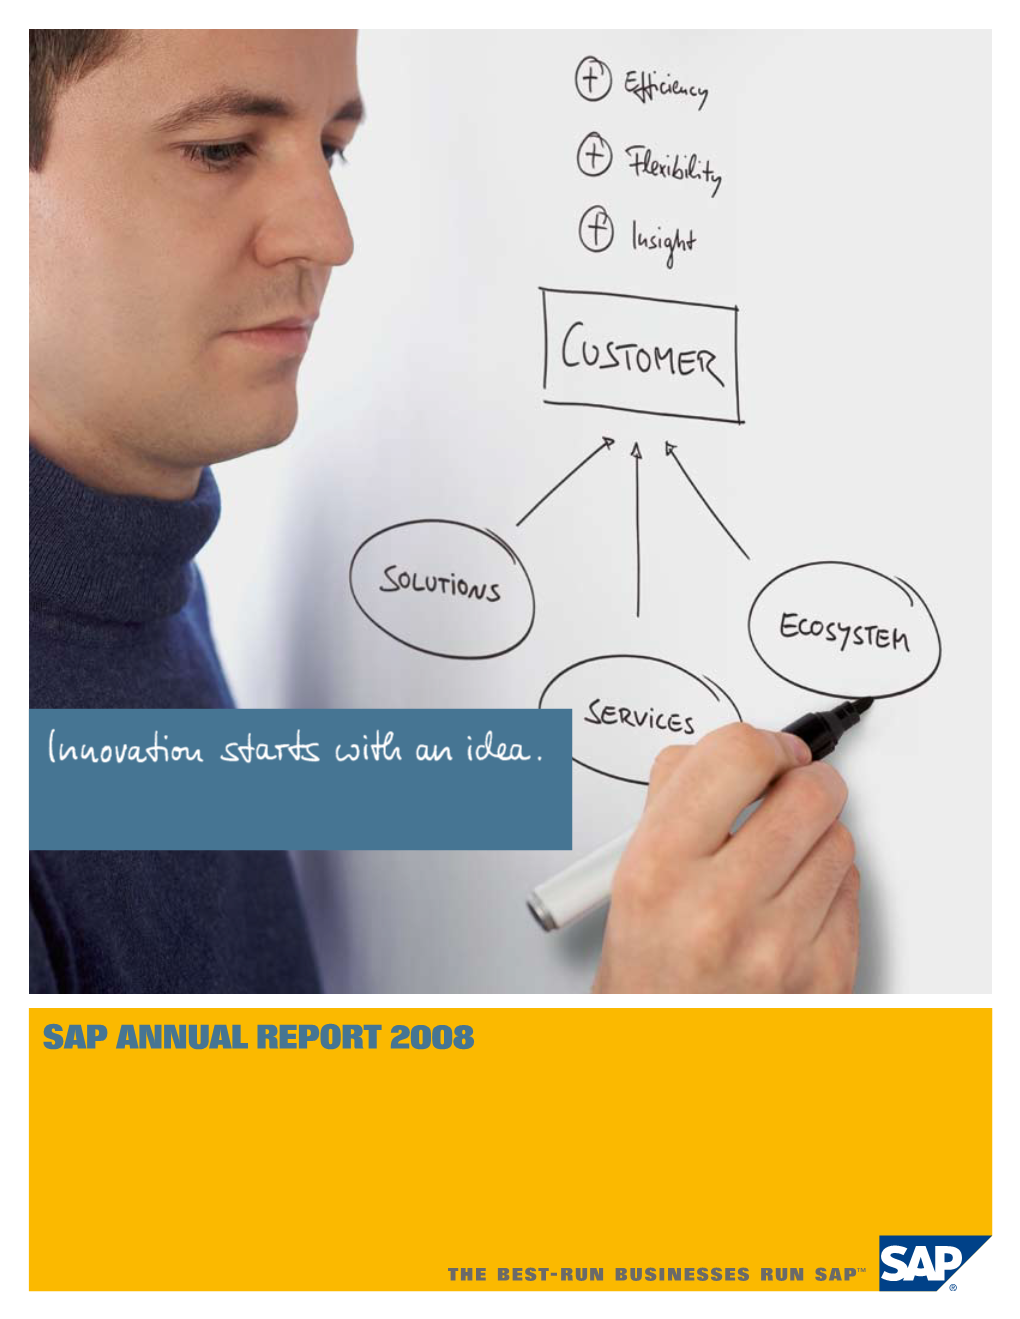 SAP Annual Report 2008 Innovation Starts with an Idea